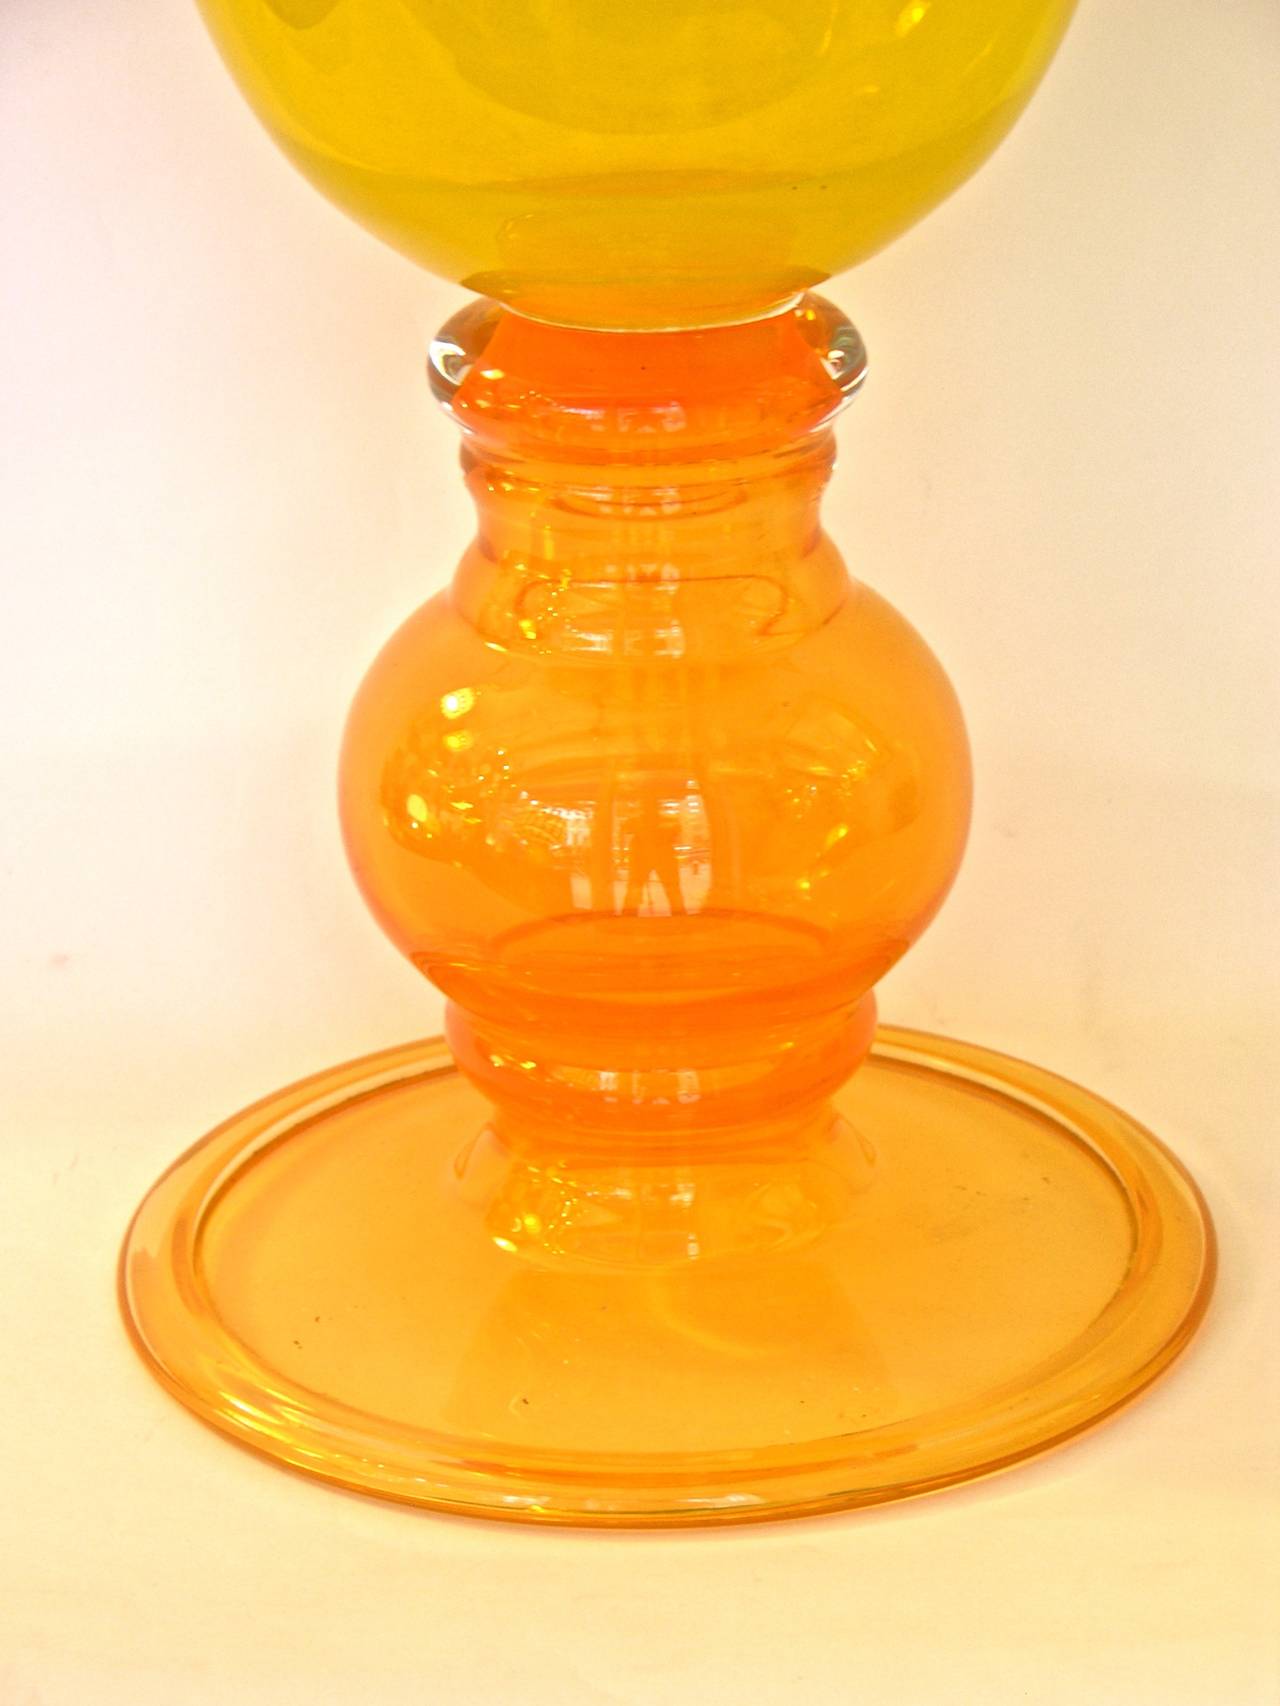 A striking Art Glass piece with the highest quality of execution, with exceptional blown turned borders, the yellow flared central body on a refined bulb base in blown orange Murano glass.